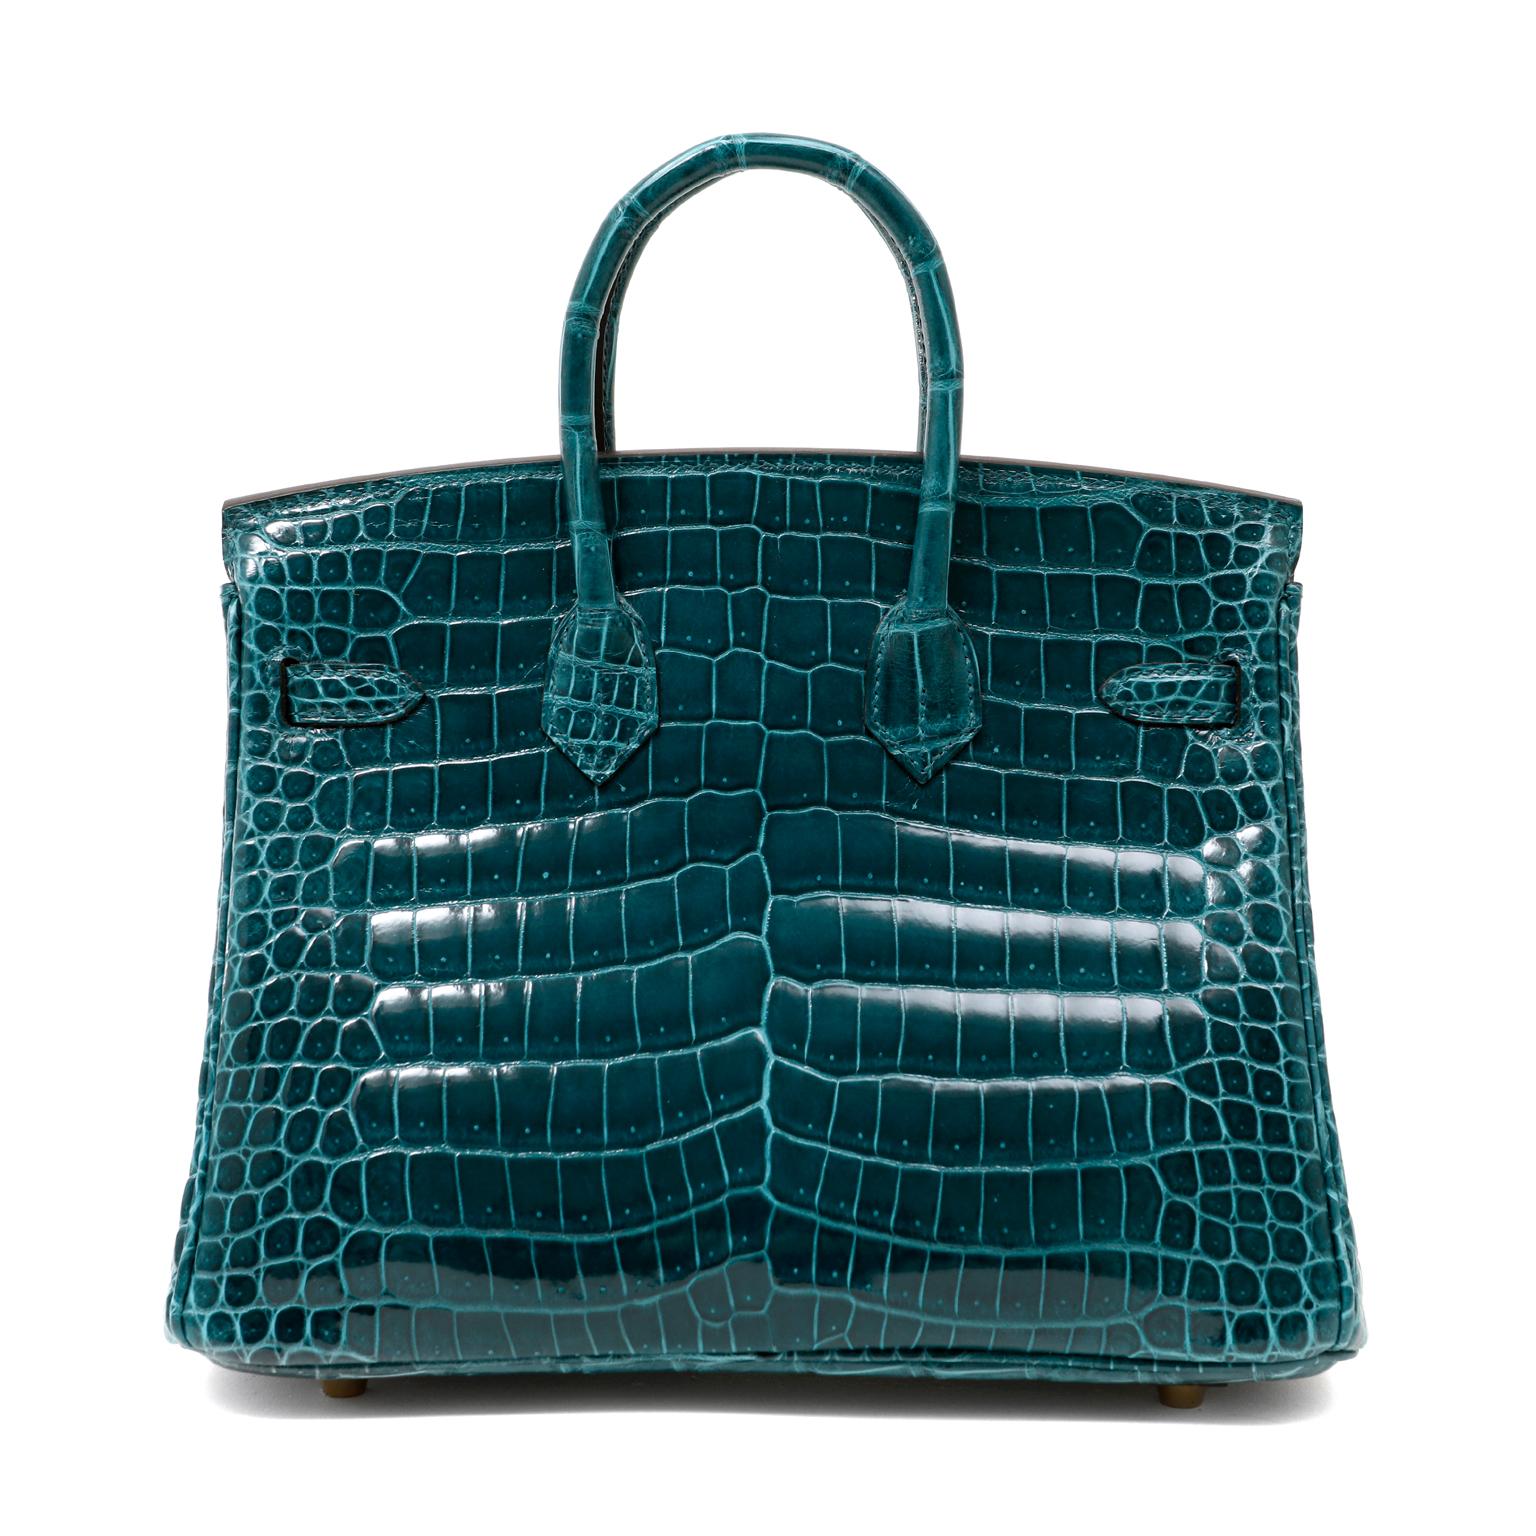 This authentic Hermès Green Porosus Crocodile 25 cm Birkin is in pristine unworn condition with the protective plastic intact on the hardware.  Considered by many to be the premier Hermès skin, Porosus crocodile is characterized by a symmetrical